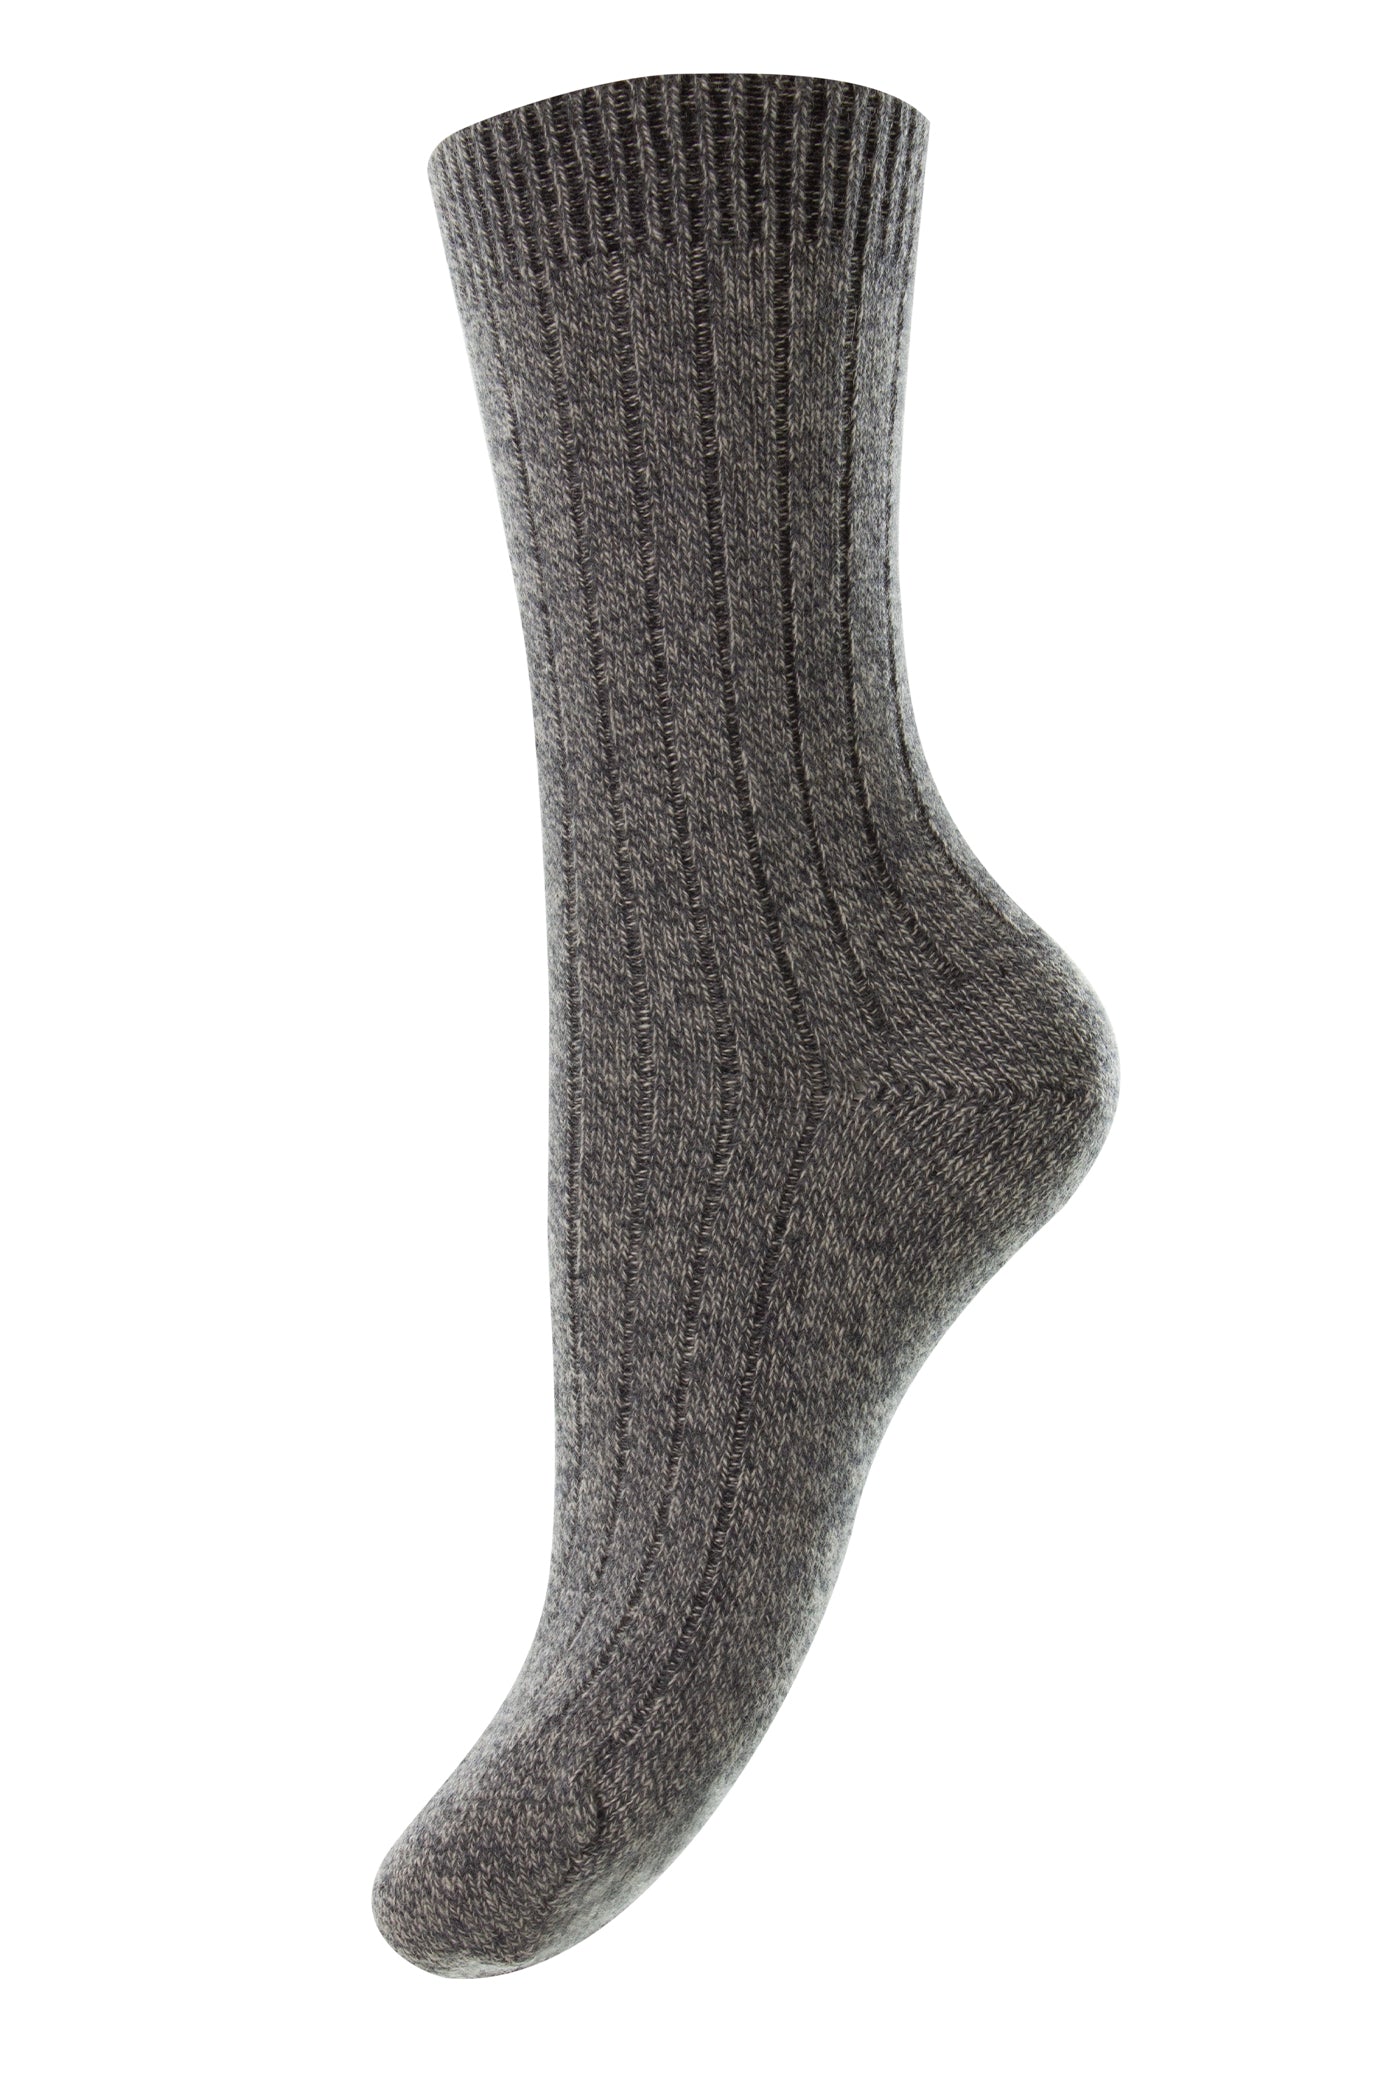 Charcoal. There is nothing cosier than cashmere socks! It is as if someone plugged you into a heat source. These are made in Scotland by Pantherella from the finest cashmere. They are unrivalled for their quality, style and comfort.  85% Cashmere 15% Nylon (for durability).